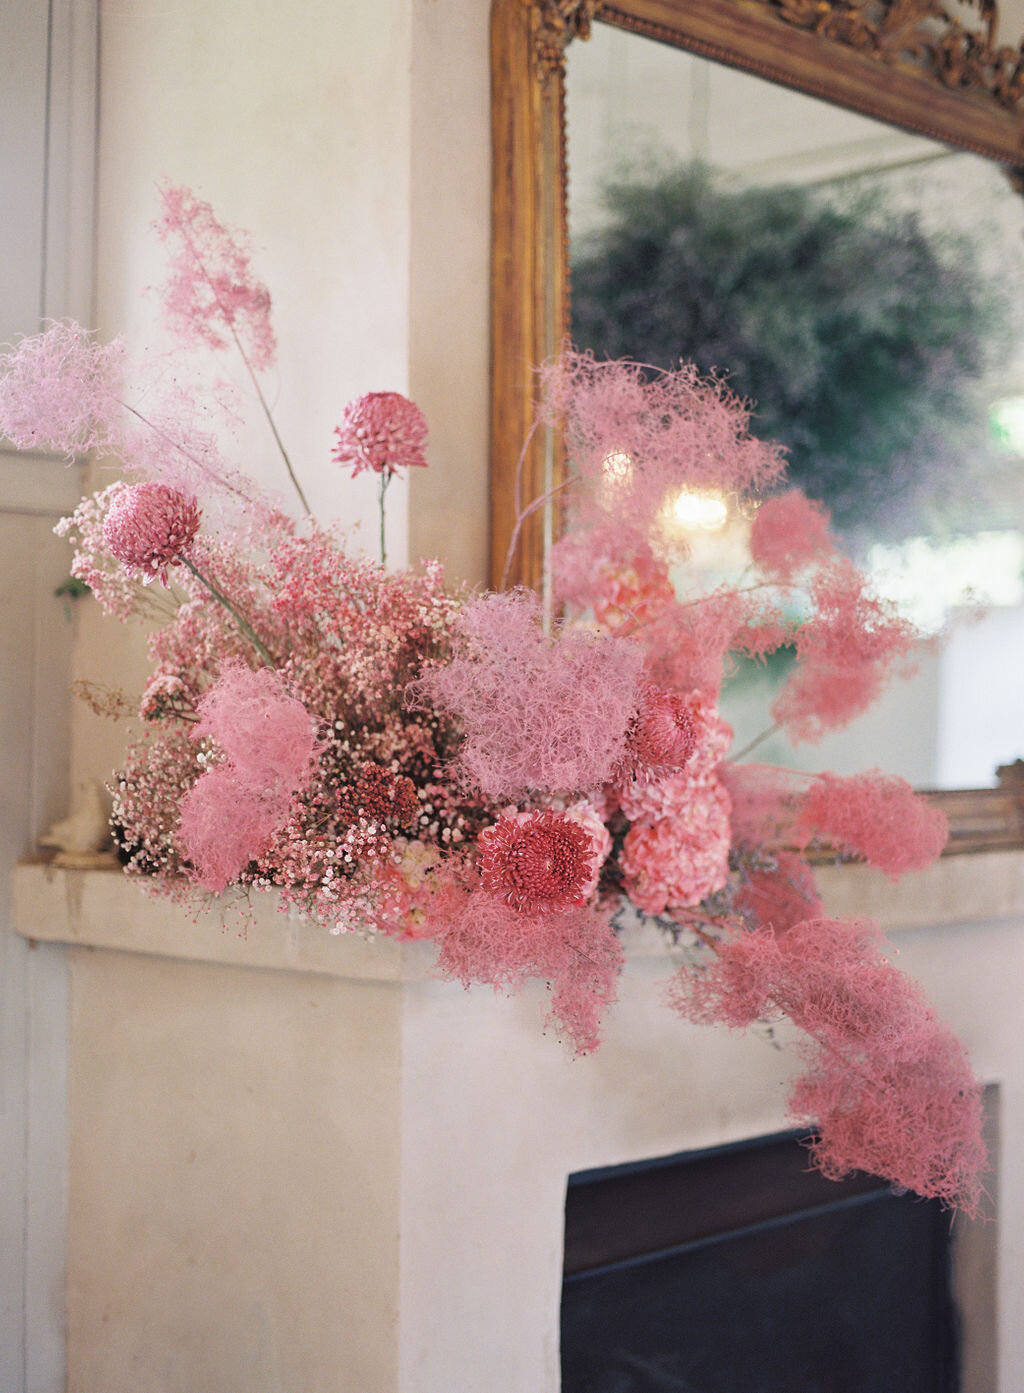 Sprayed smoke bush and some blooms for an unusual and bold wedding arrangement that inspires